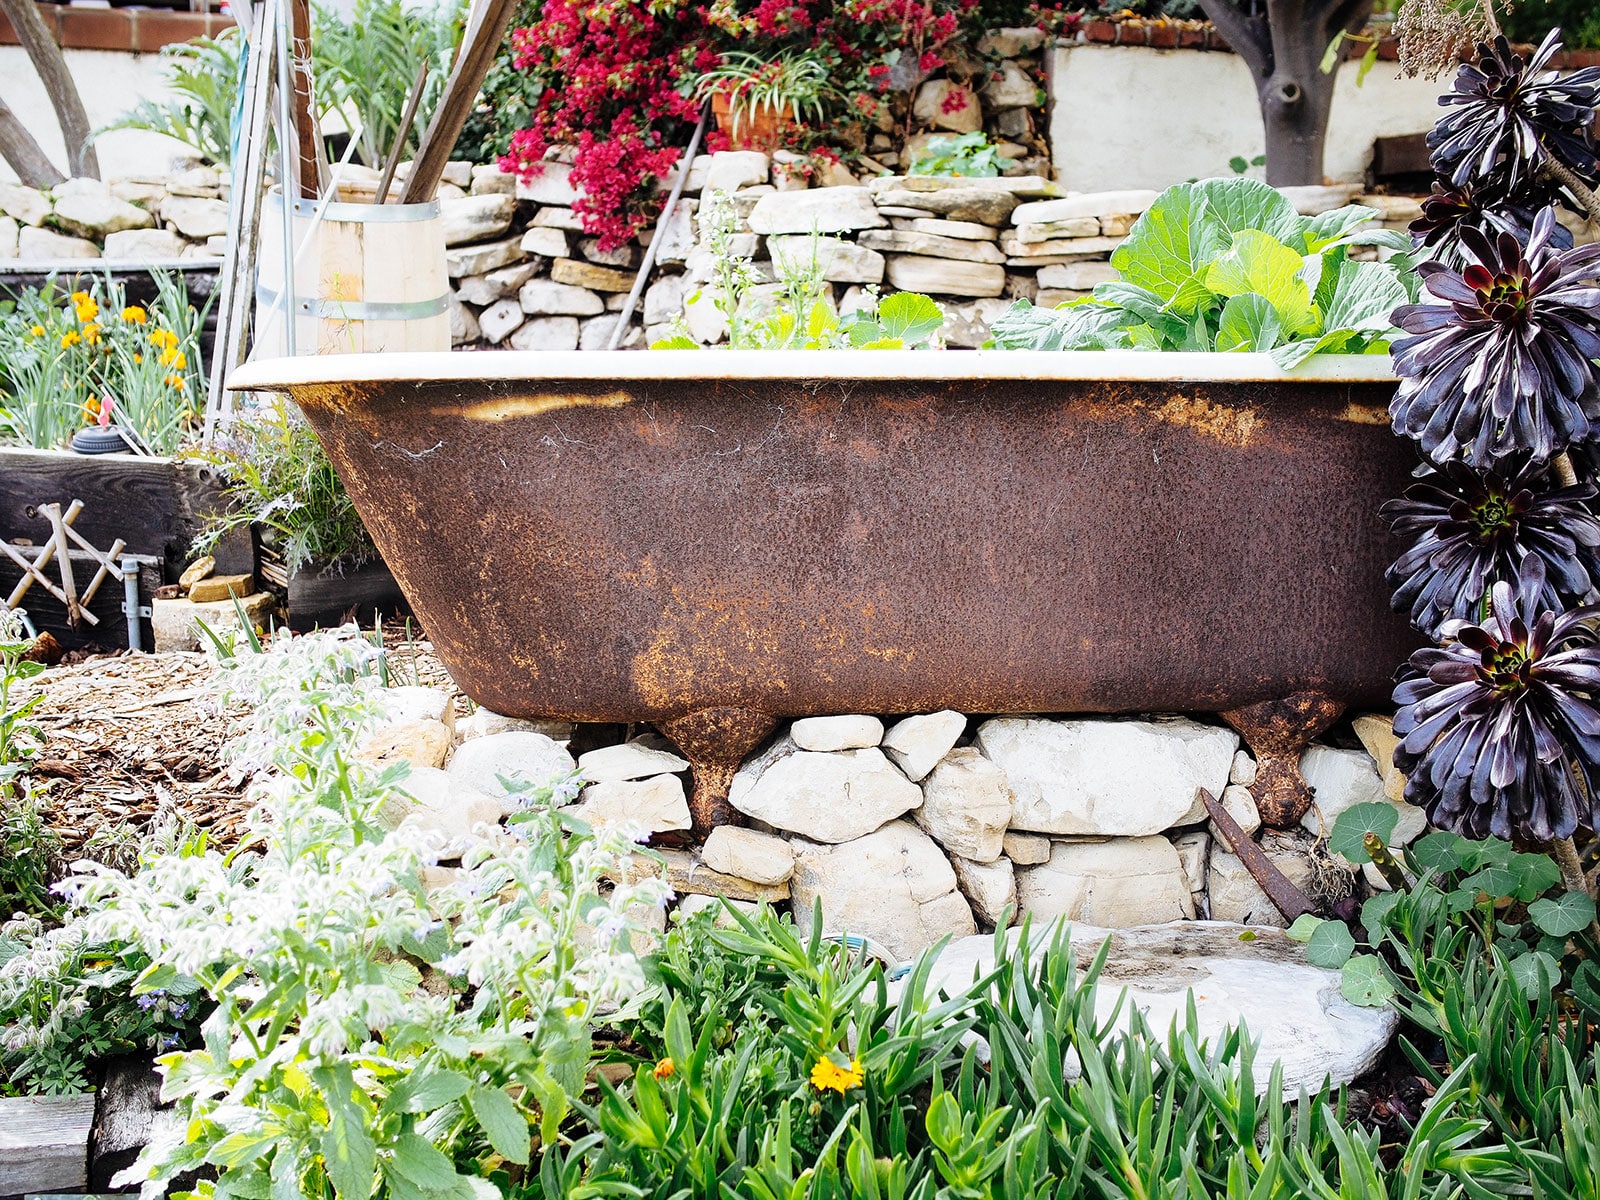 Side view of a rusted vintage clawfoot tub turned into a planter in the garden